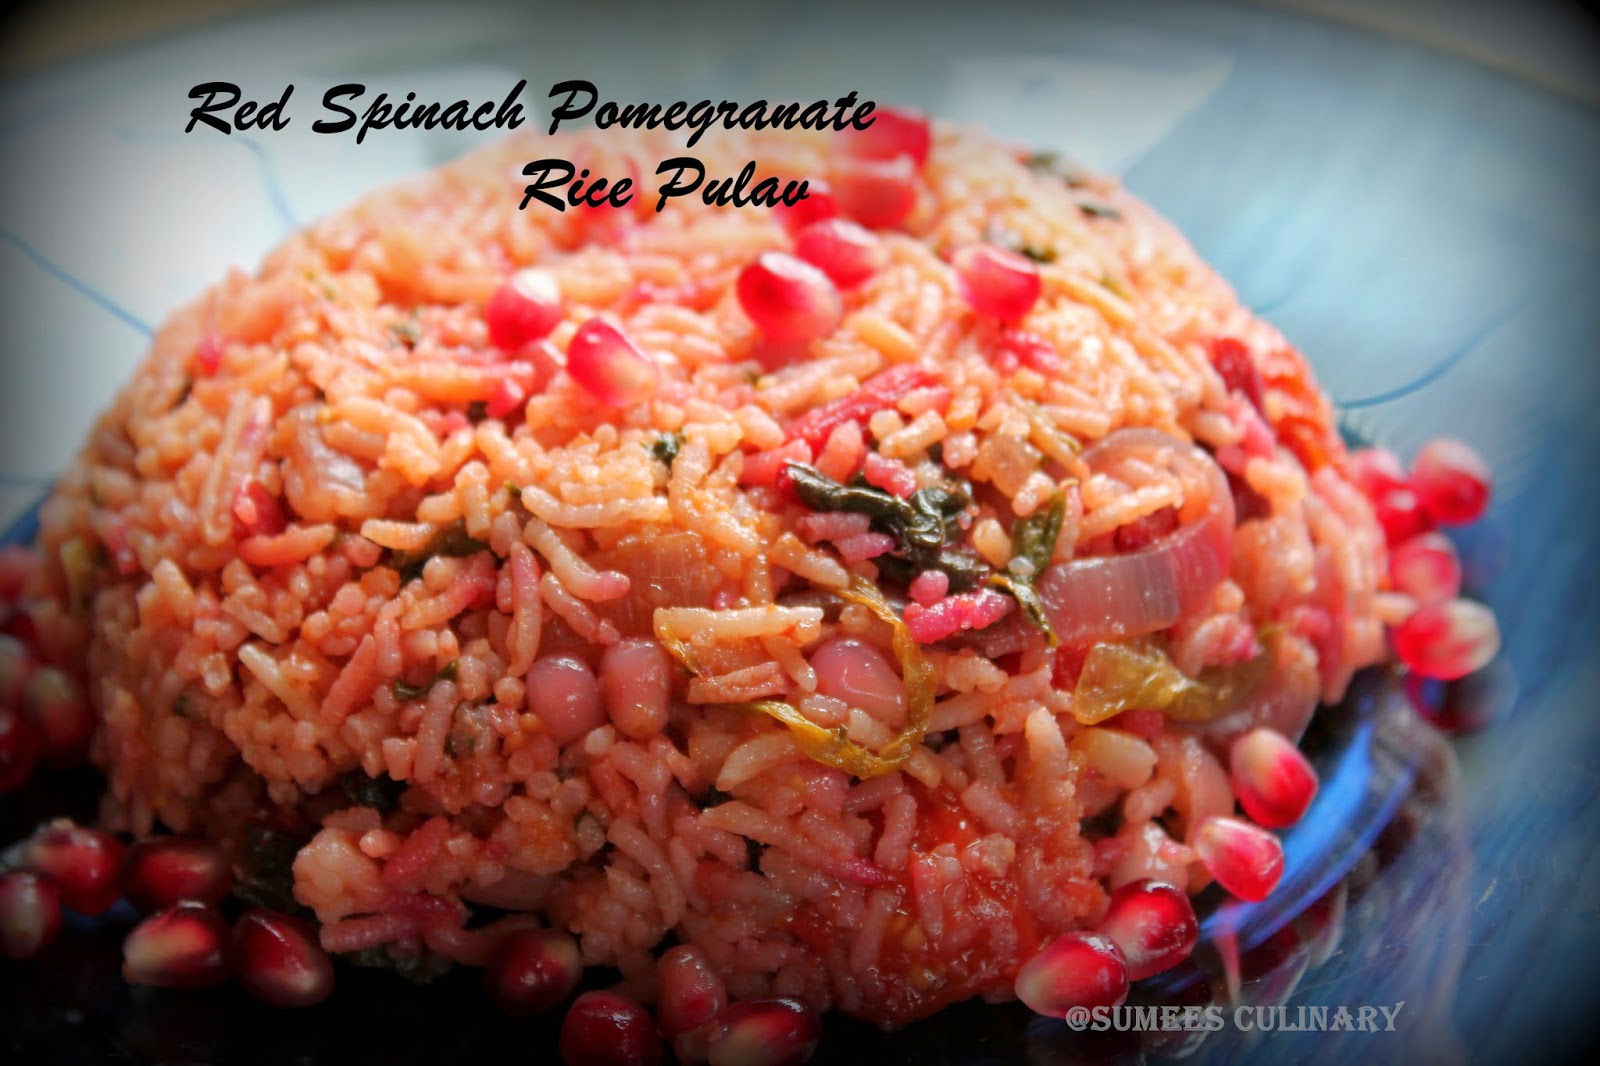 red spinach pomegranate rice pilaf/ pulav